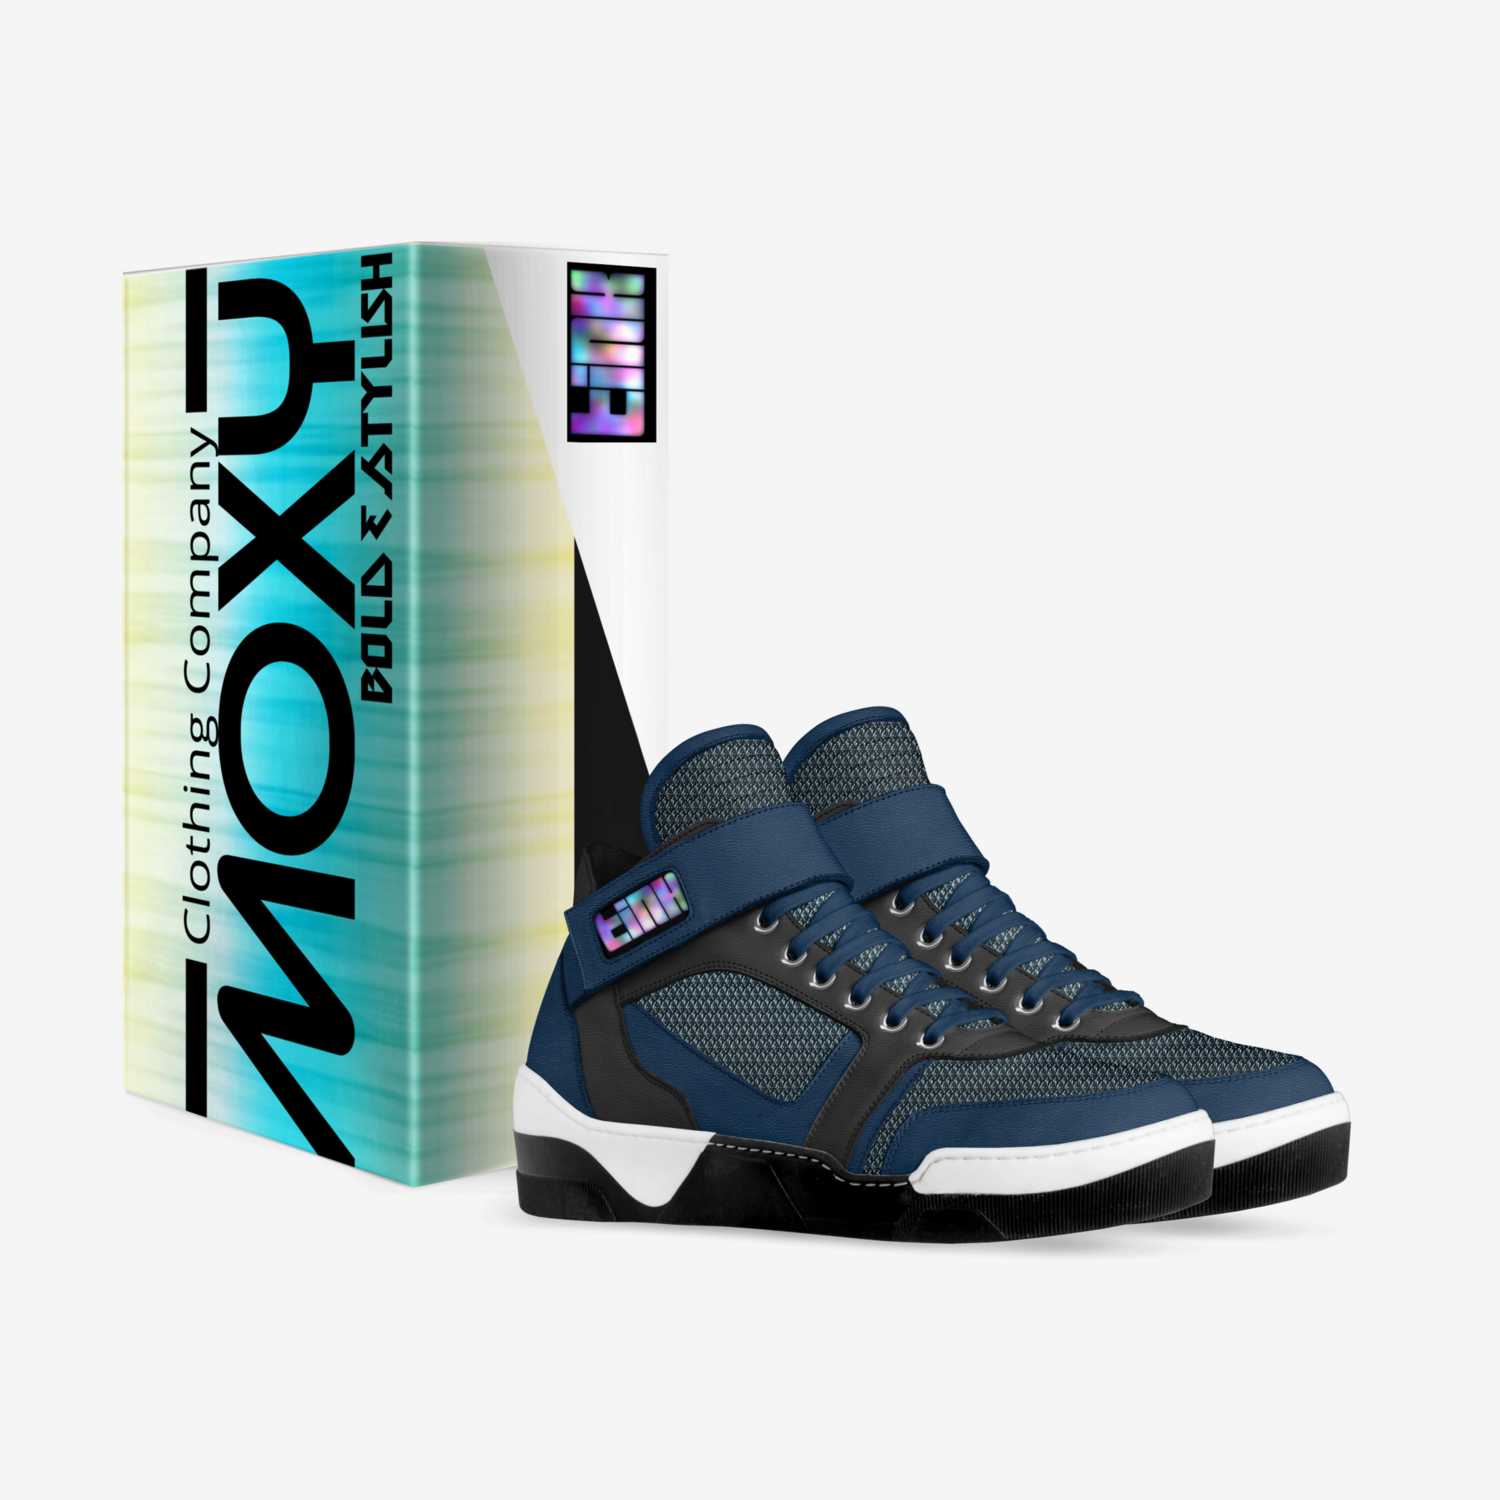 TINK custom made in Italy shoes by Moxy Clothing Co. | Box view